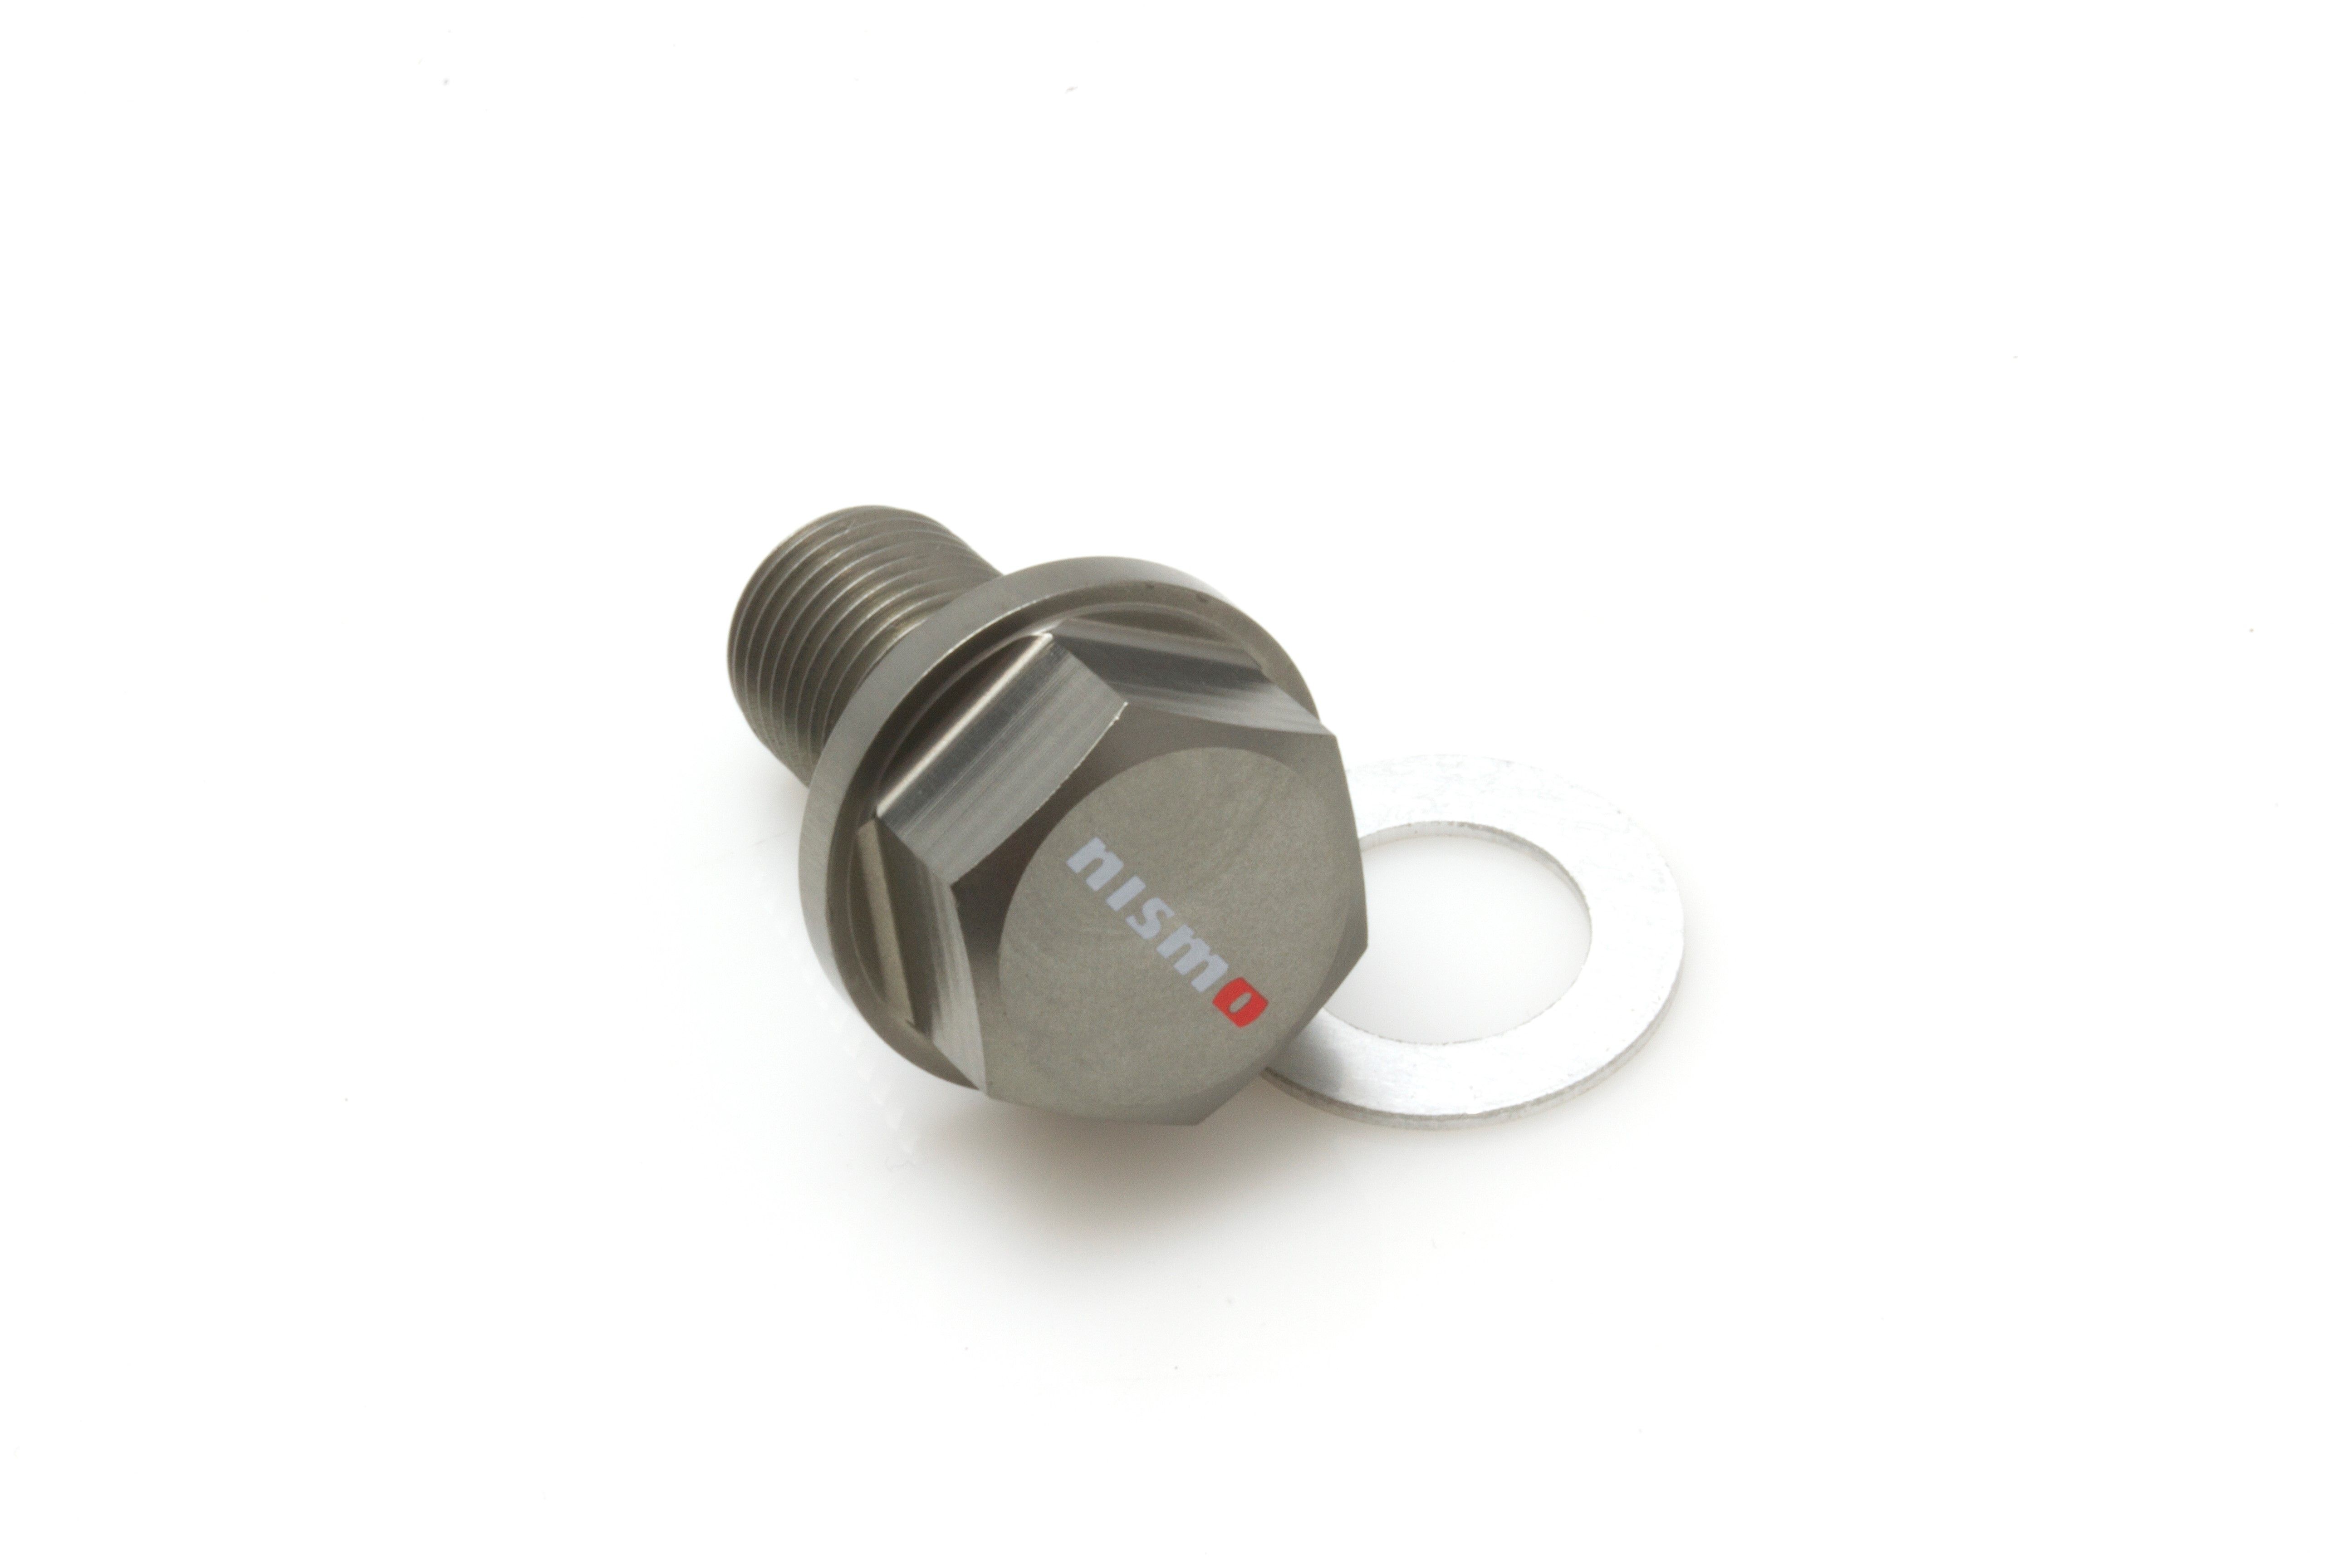 Nismo Magnetic Oil Drain Plugs w/ Washer, 12x1.25 - BACK IN STOCK!!!